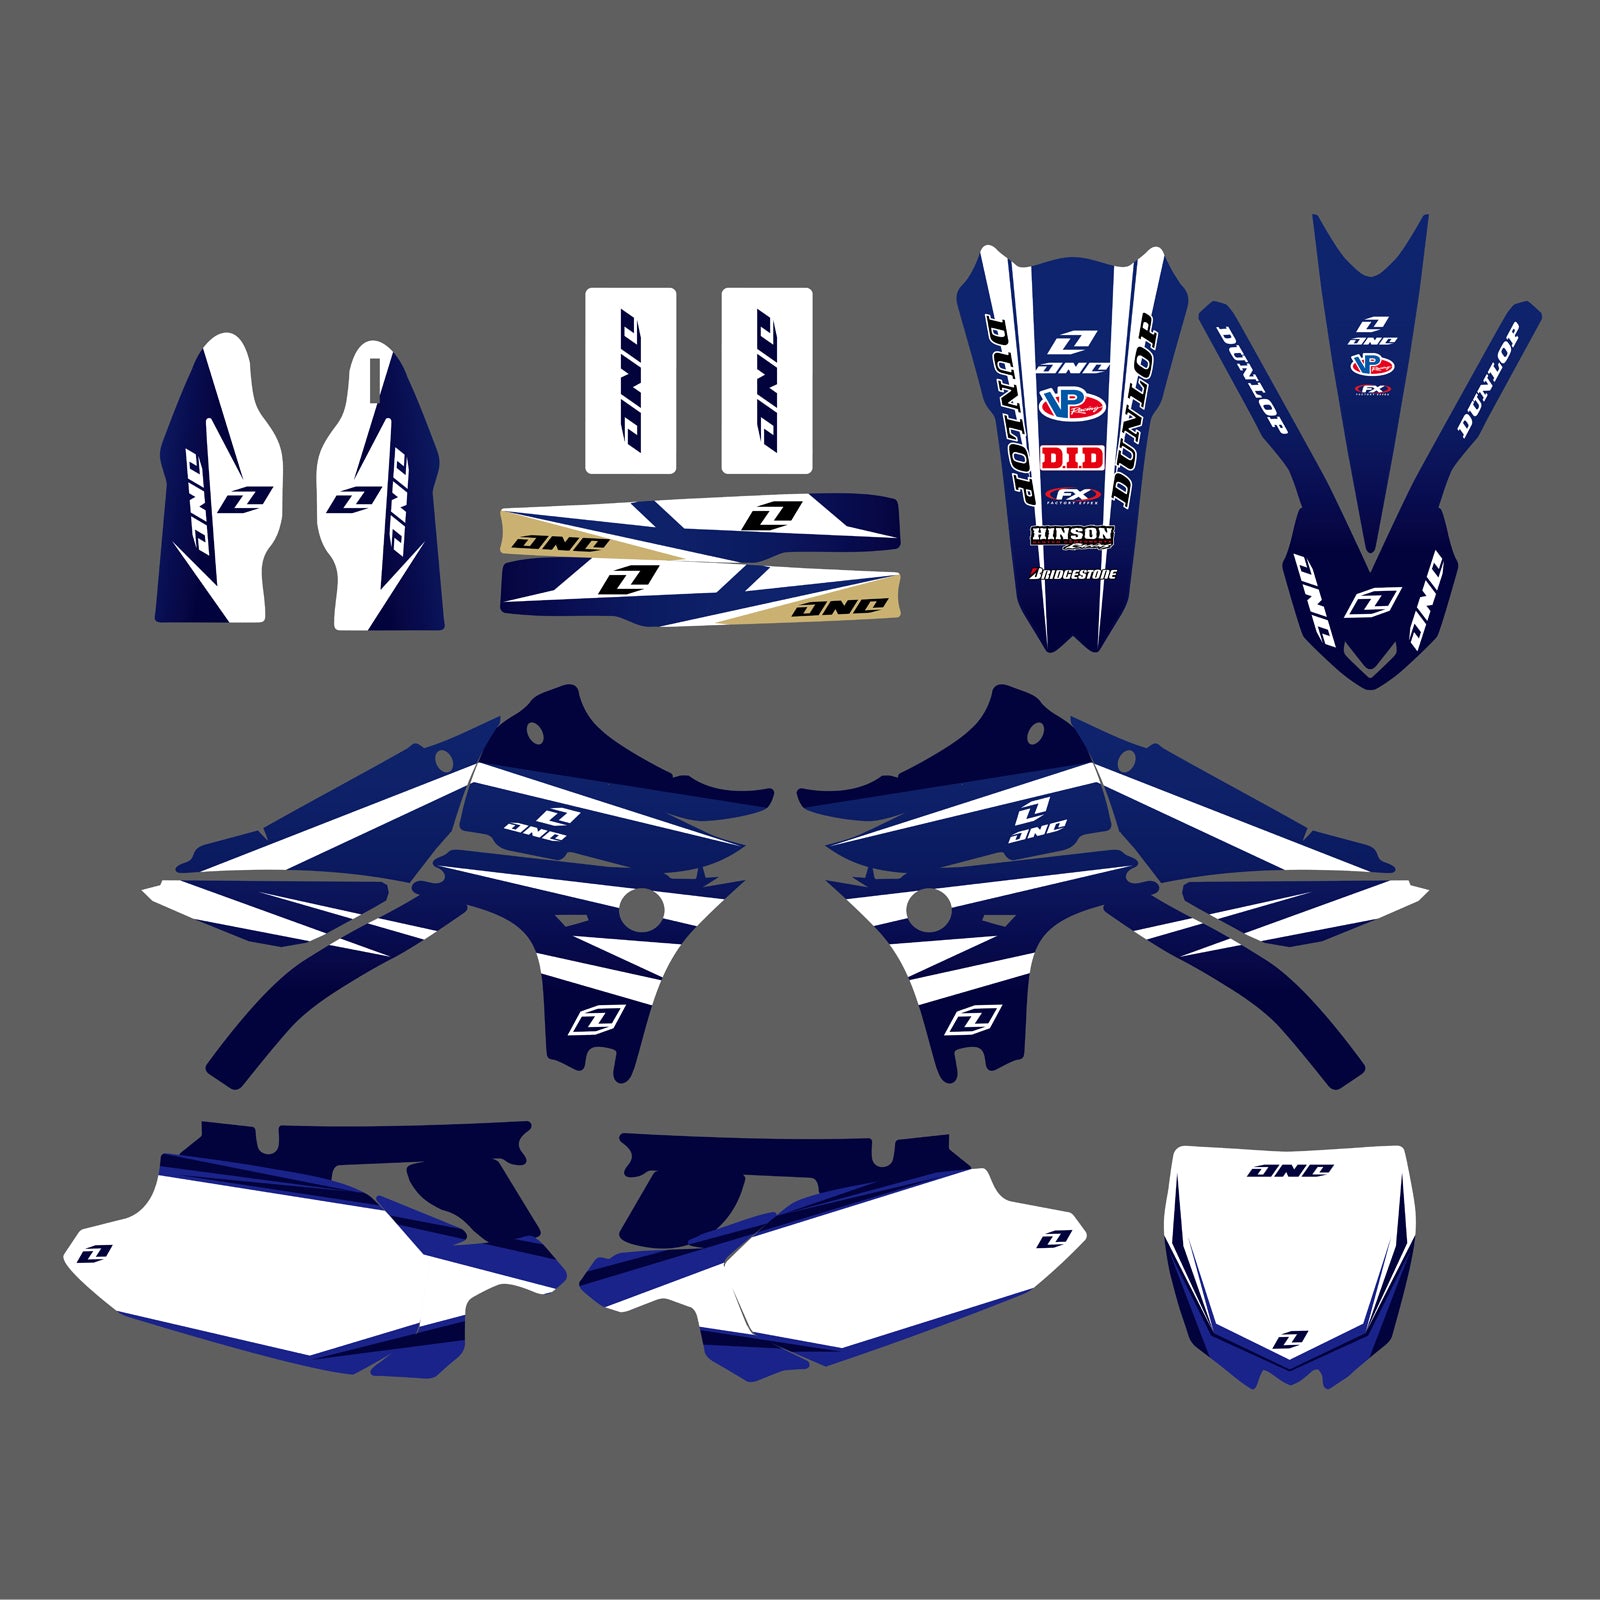 New Style Stickers Kits for Yamaha YZ450F YZF450 2010 2011 2012 2013